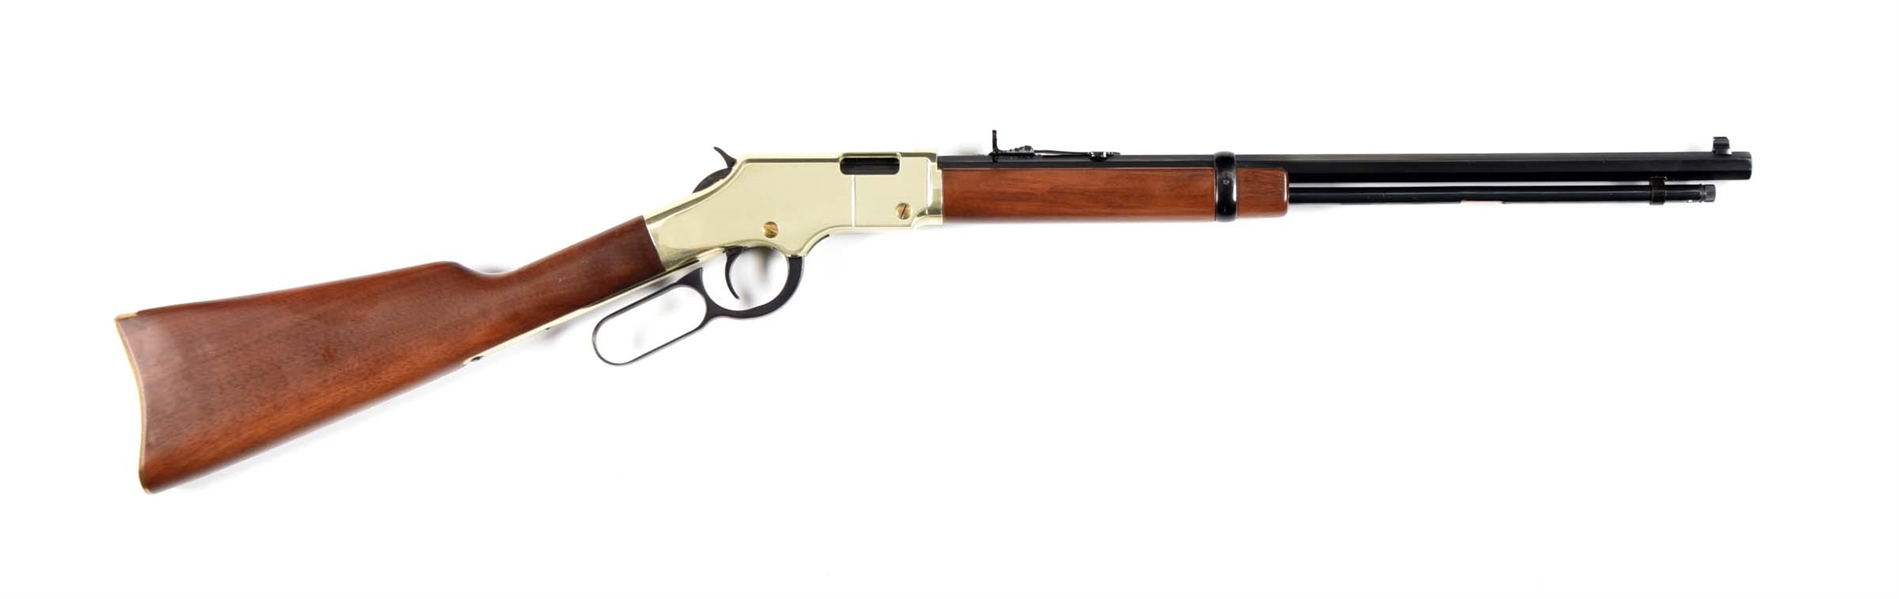 (M) HENRY REPEATING ARMS GOLDEN BOY LEVER ACTION 22 CARBINE